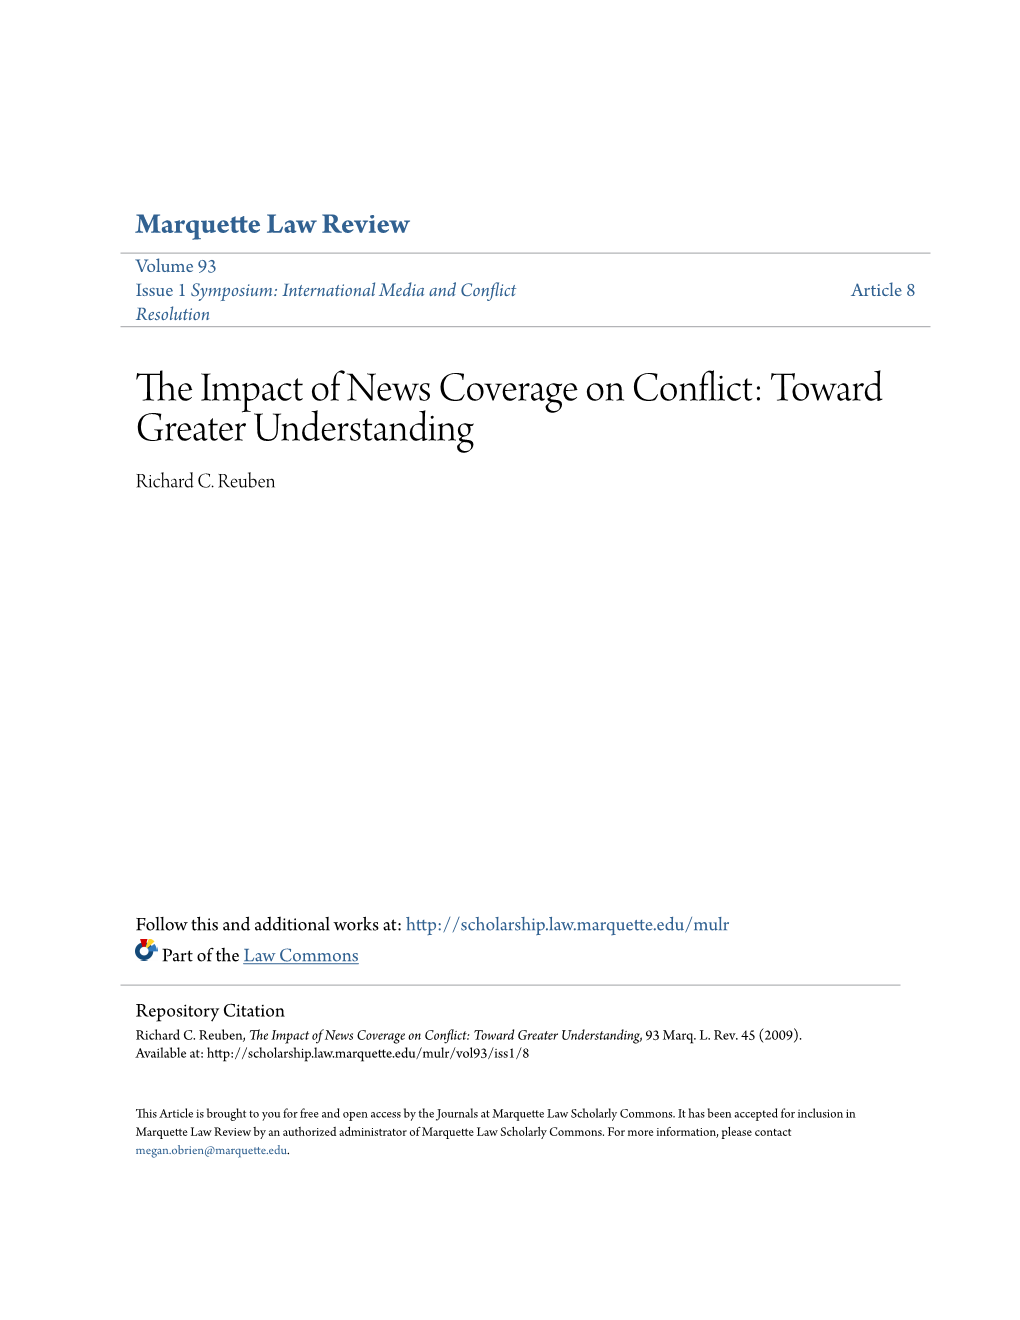 The Impact of News Coverage on Conflict: Toward Greater Understanding, 93 Marq